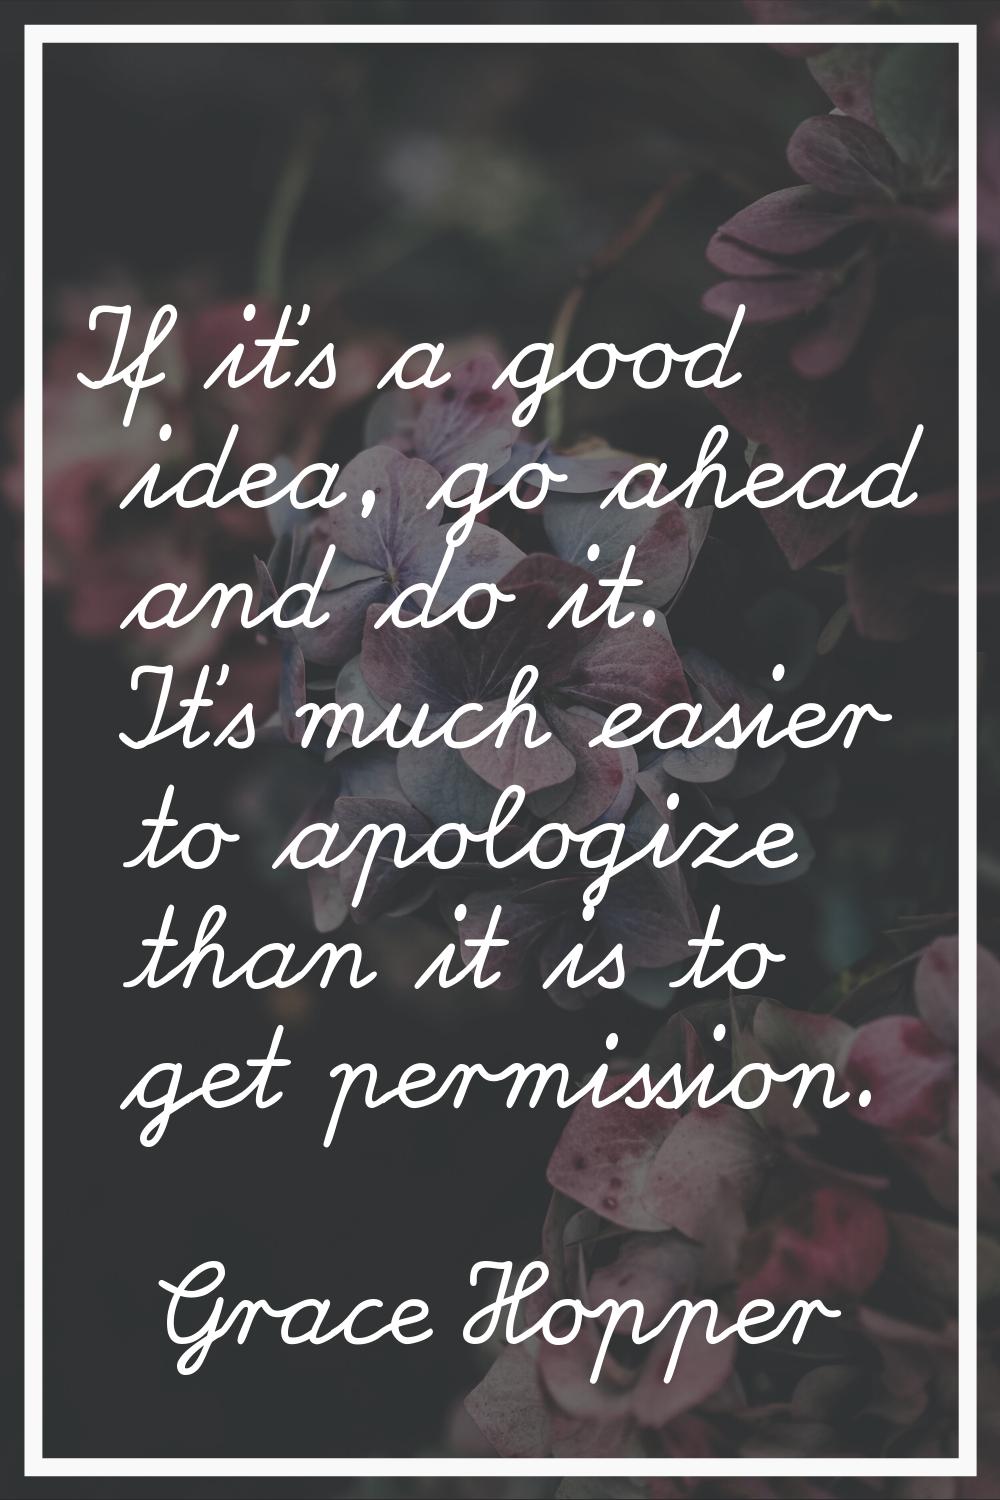 If it's a good idea, go ahead and do it. It's much easier to apologize than it is to get permission